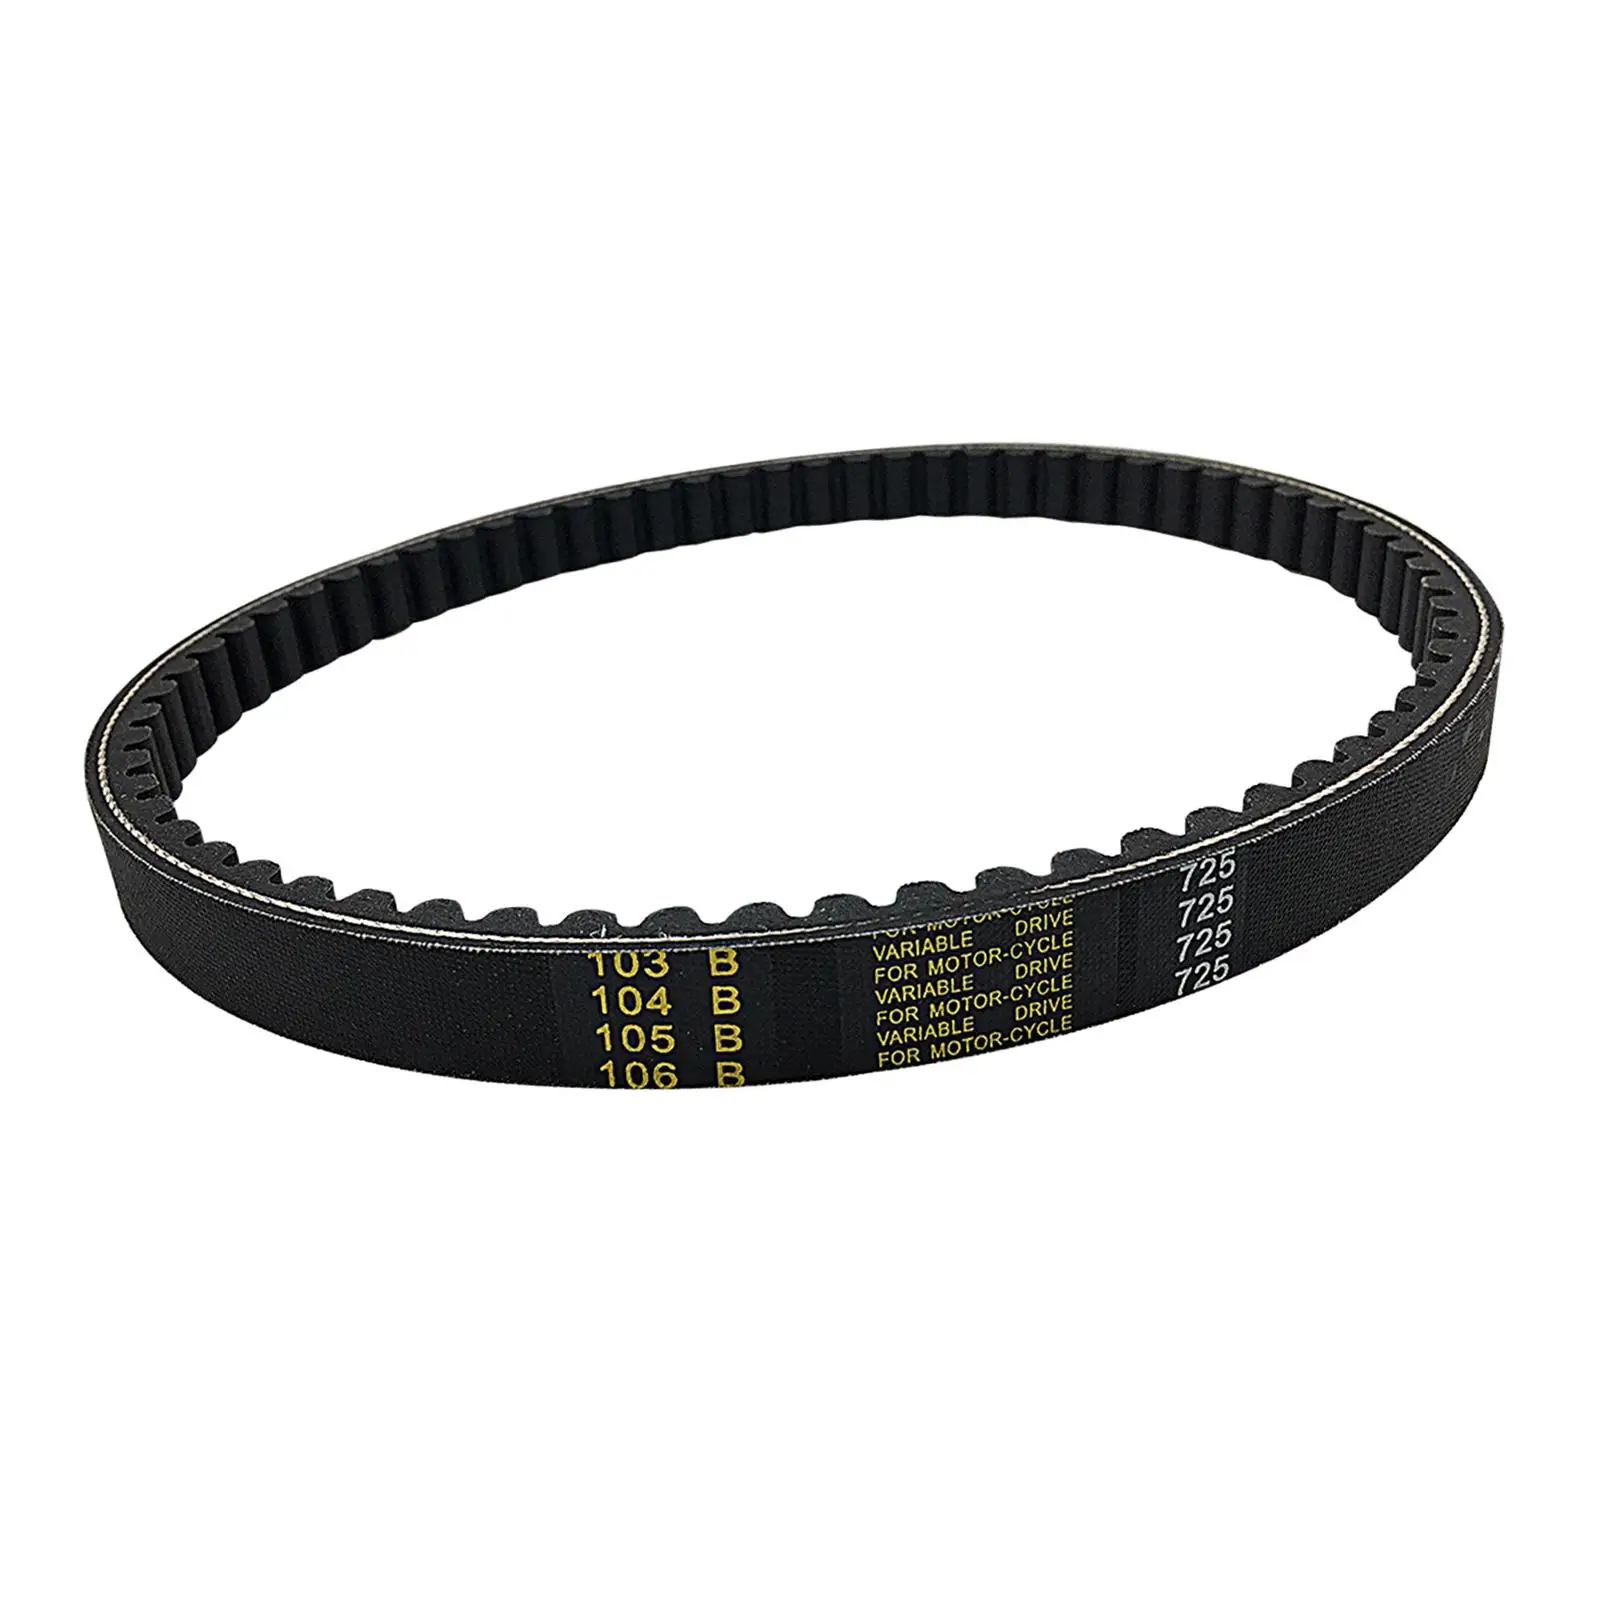 Drive Belt 725 Easy to Install Premium Durable Rubber Spare Parts Replacement Accessories for 30 Series Torque Converter